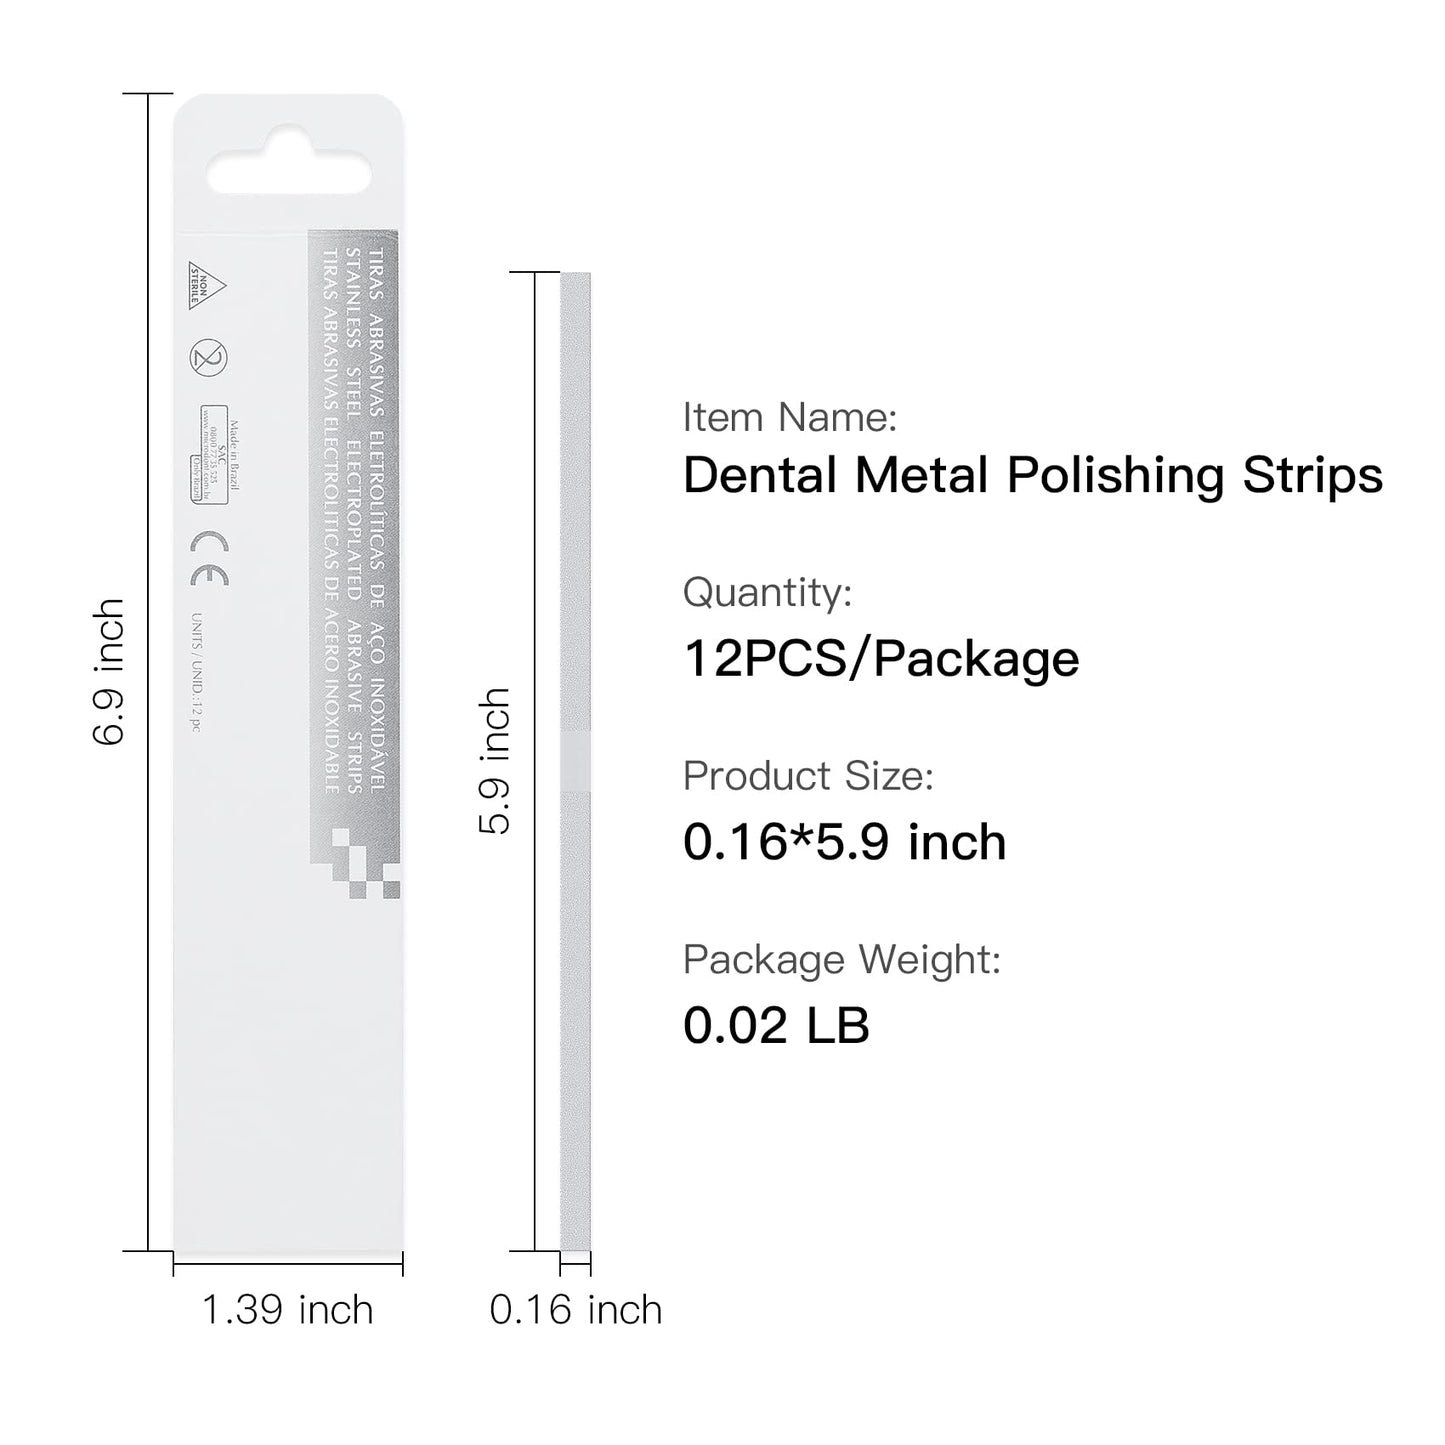 DM-PS Dental Metal Polishing Strips Double Side 12 PCS, Stainless Finishing Strips Teeth Abraive 4mm x 6M, Cleaning Tools for Oral Care & Inter-Dental - Sanding Grinding Teeth